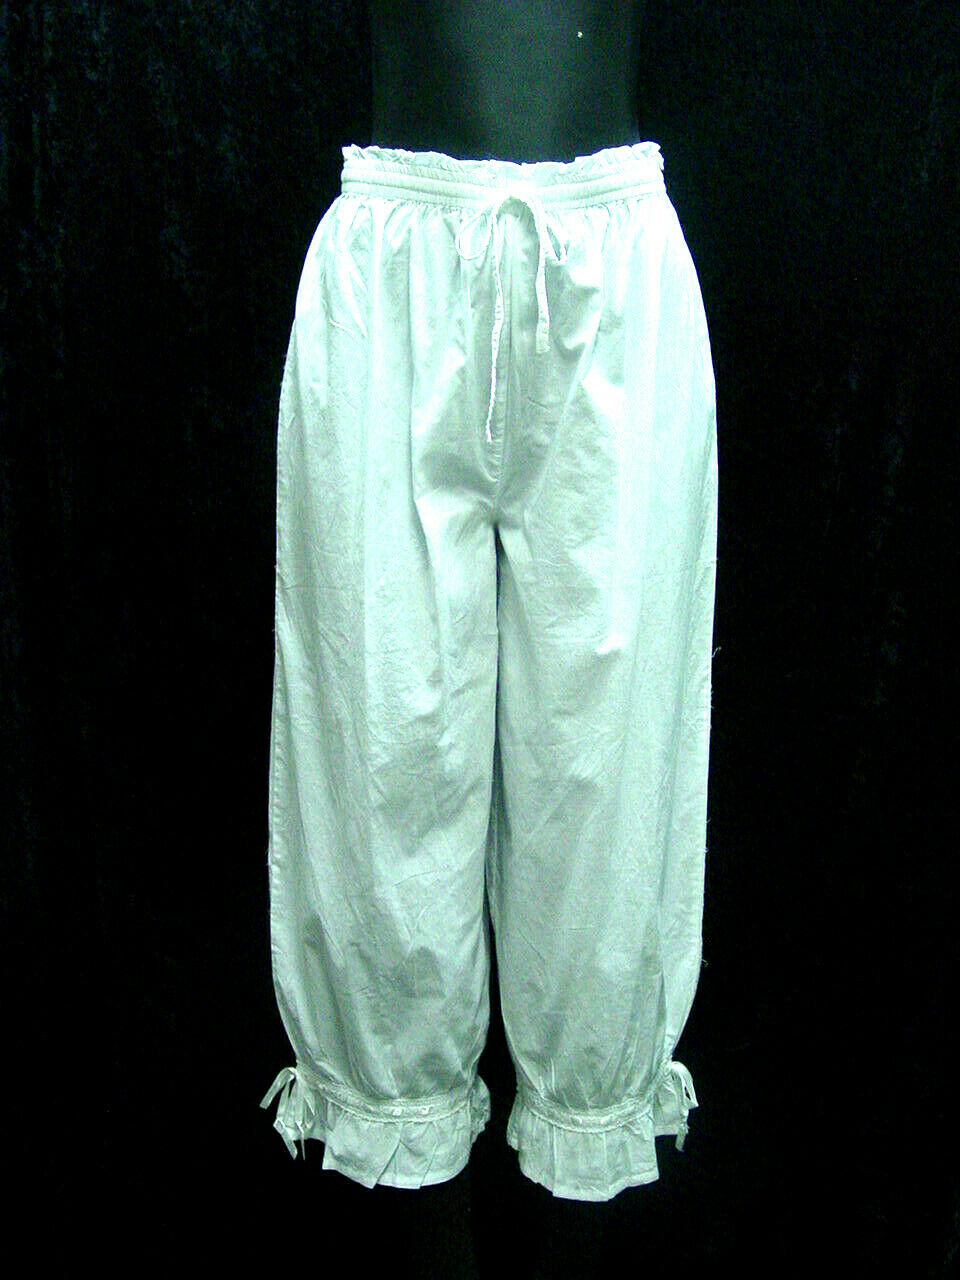 Pantaloons Bloomers Breeches Victorian Civil War White Cotton Sizes S To Xl New